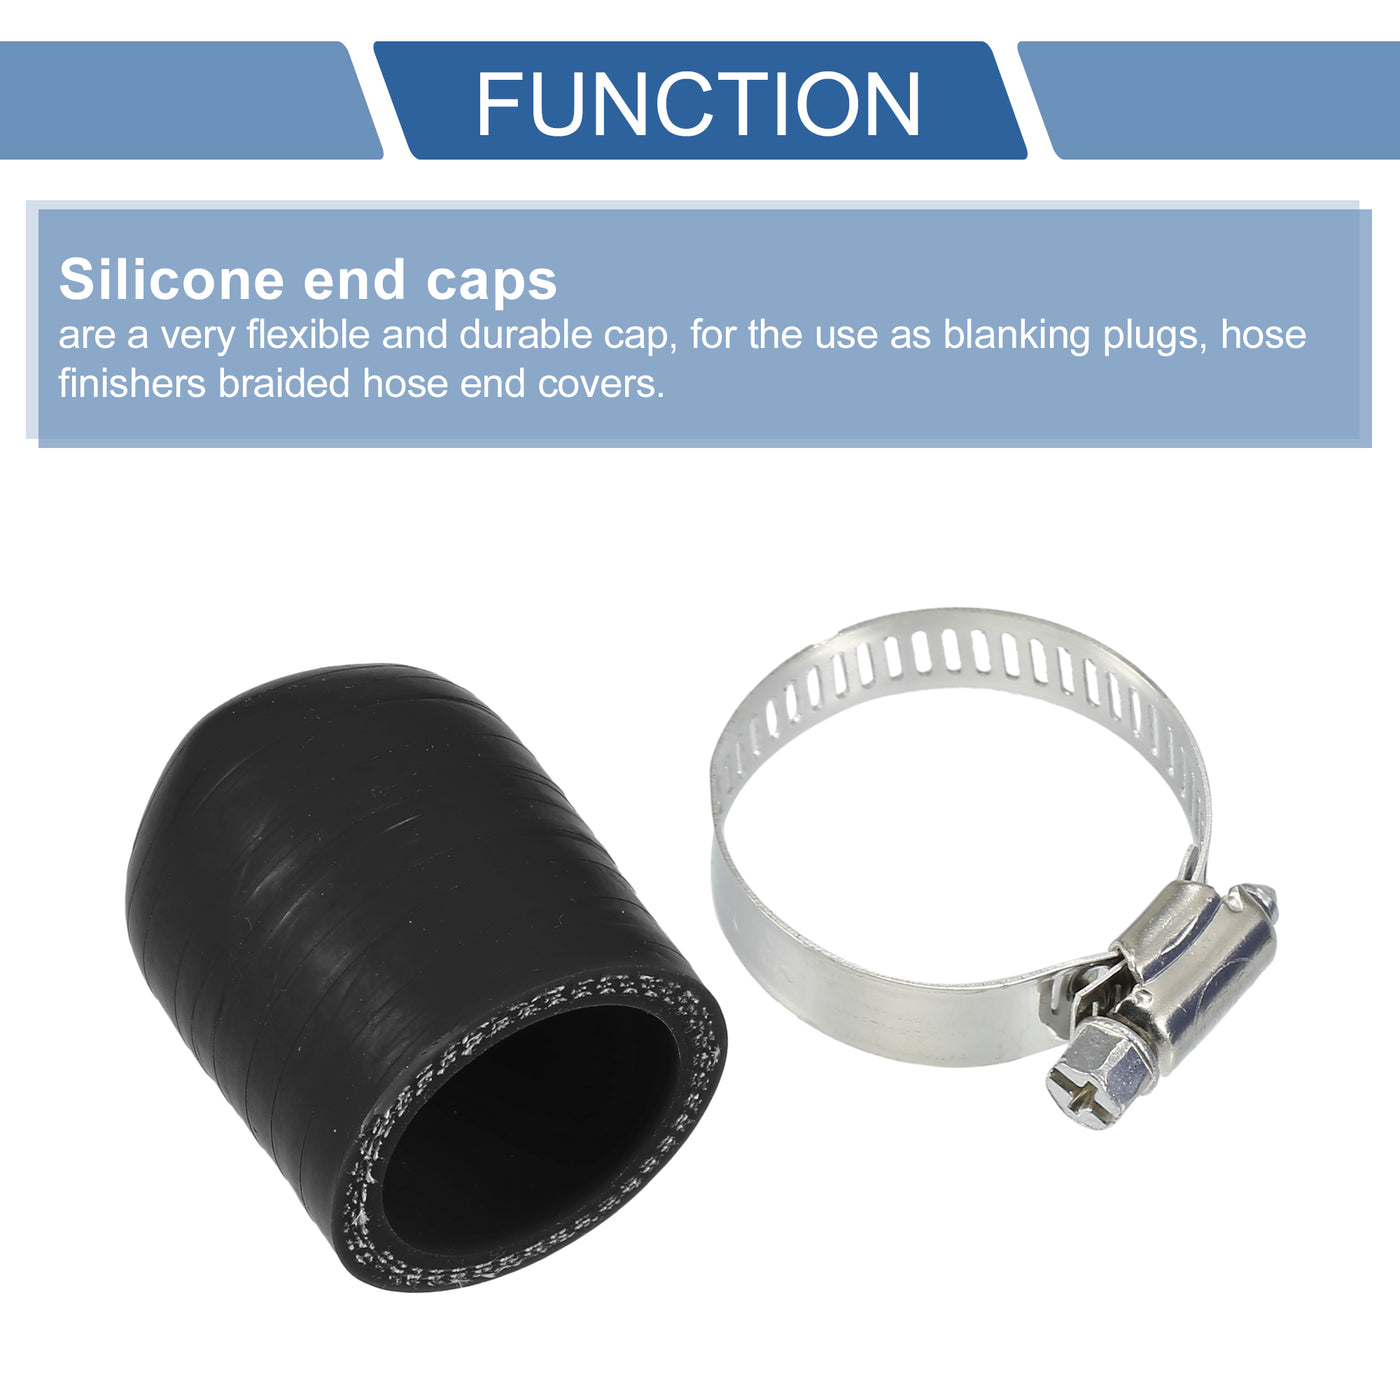 X AUTOHAUX 1 Set 30mm Length 28mm/1.10" ID Black Car Silicone Rubber Hose End Cap with Clamps Silicone Reinforced Blanking Cap for Bypass Tube Universal